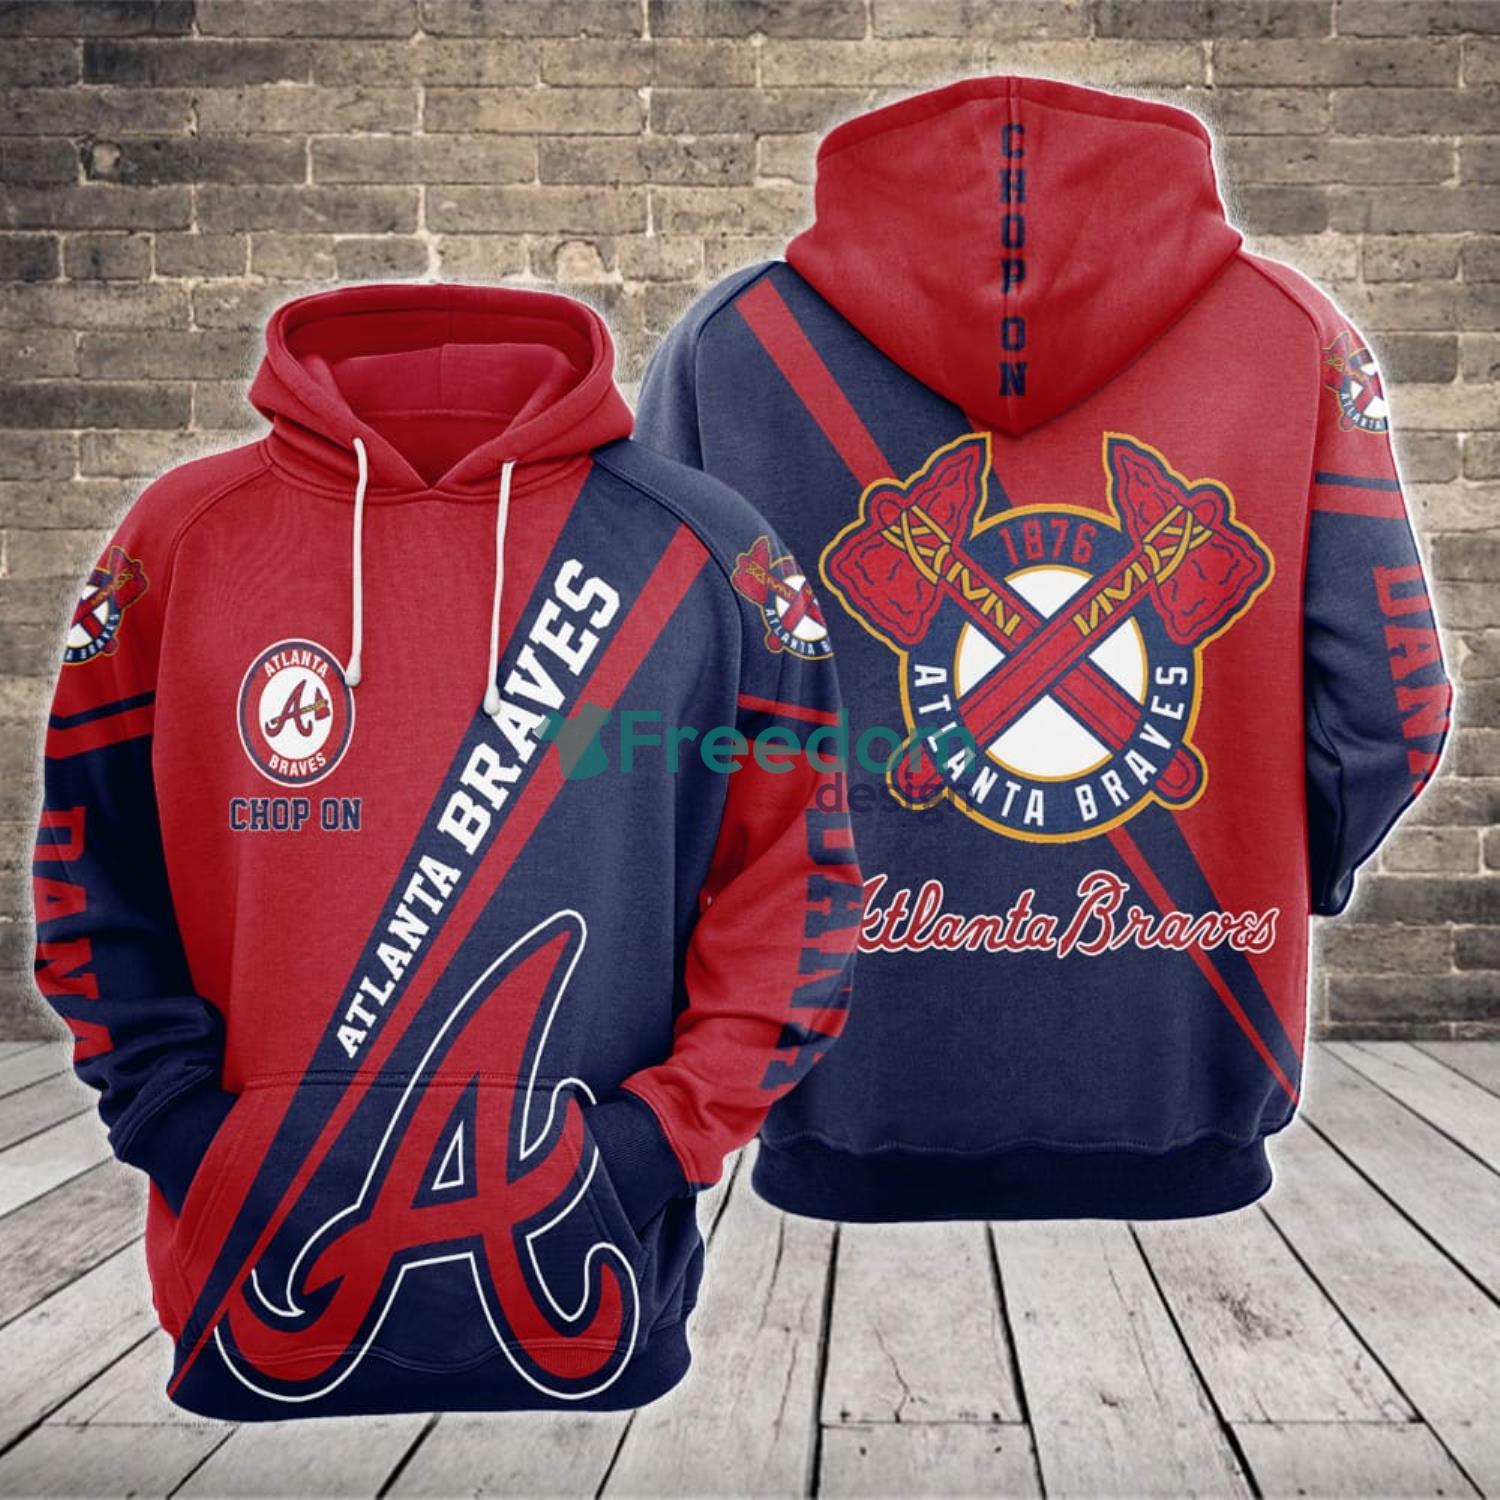 Vintage Retro Braves Sports Name Gifts Pullover Hoodie